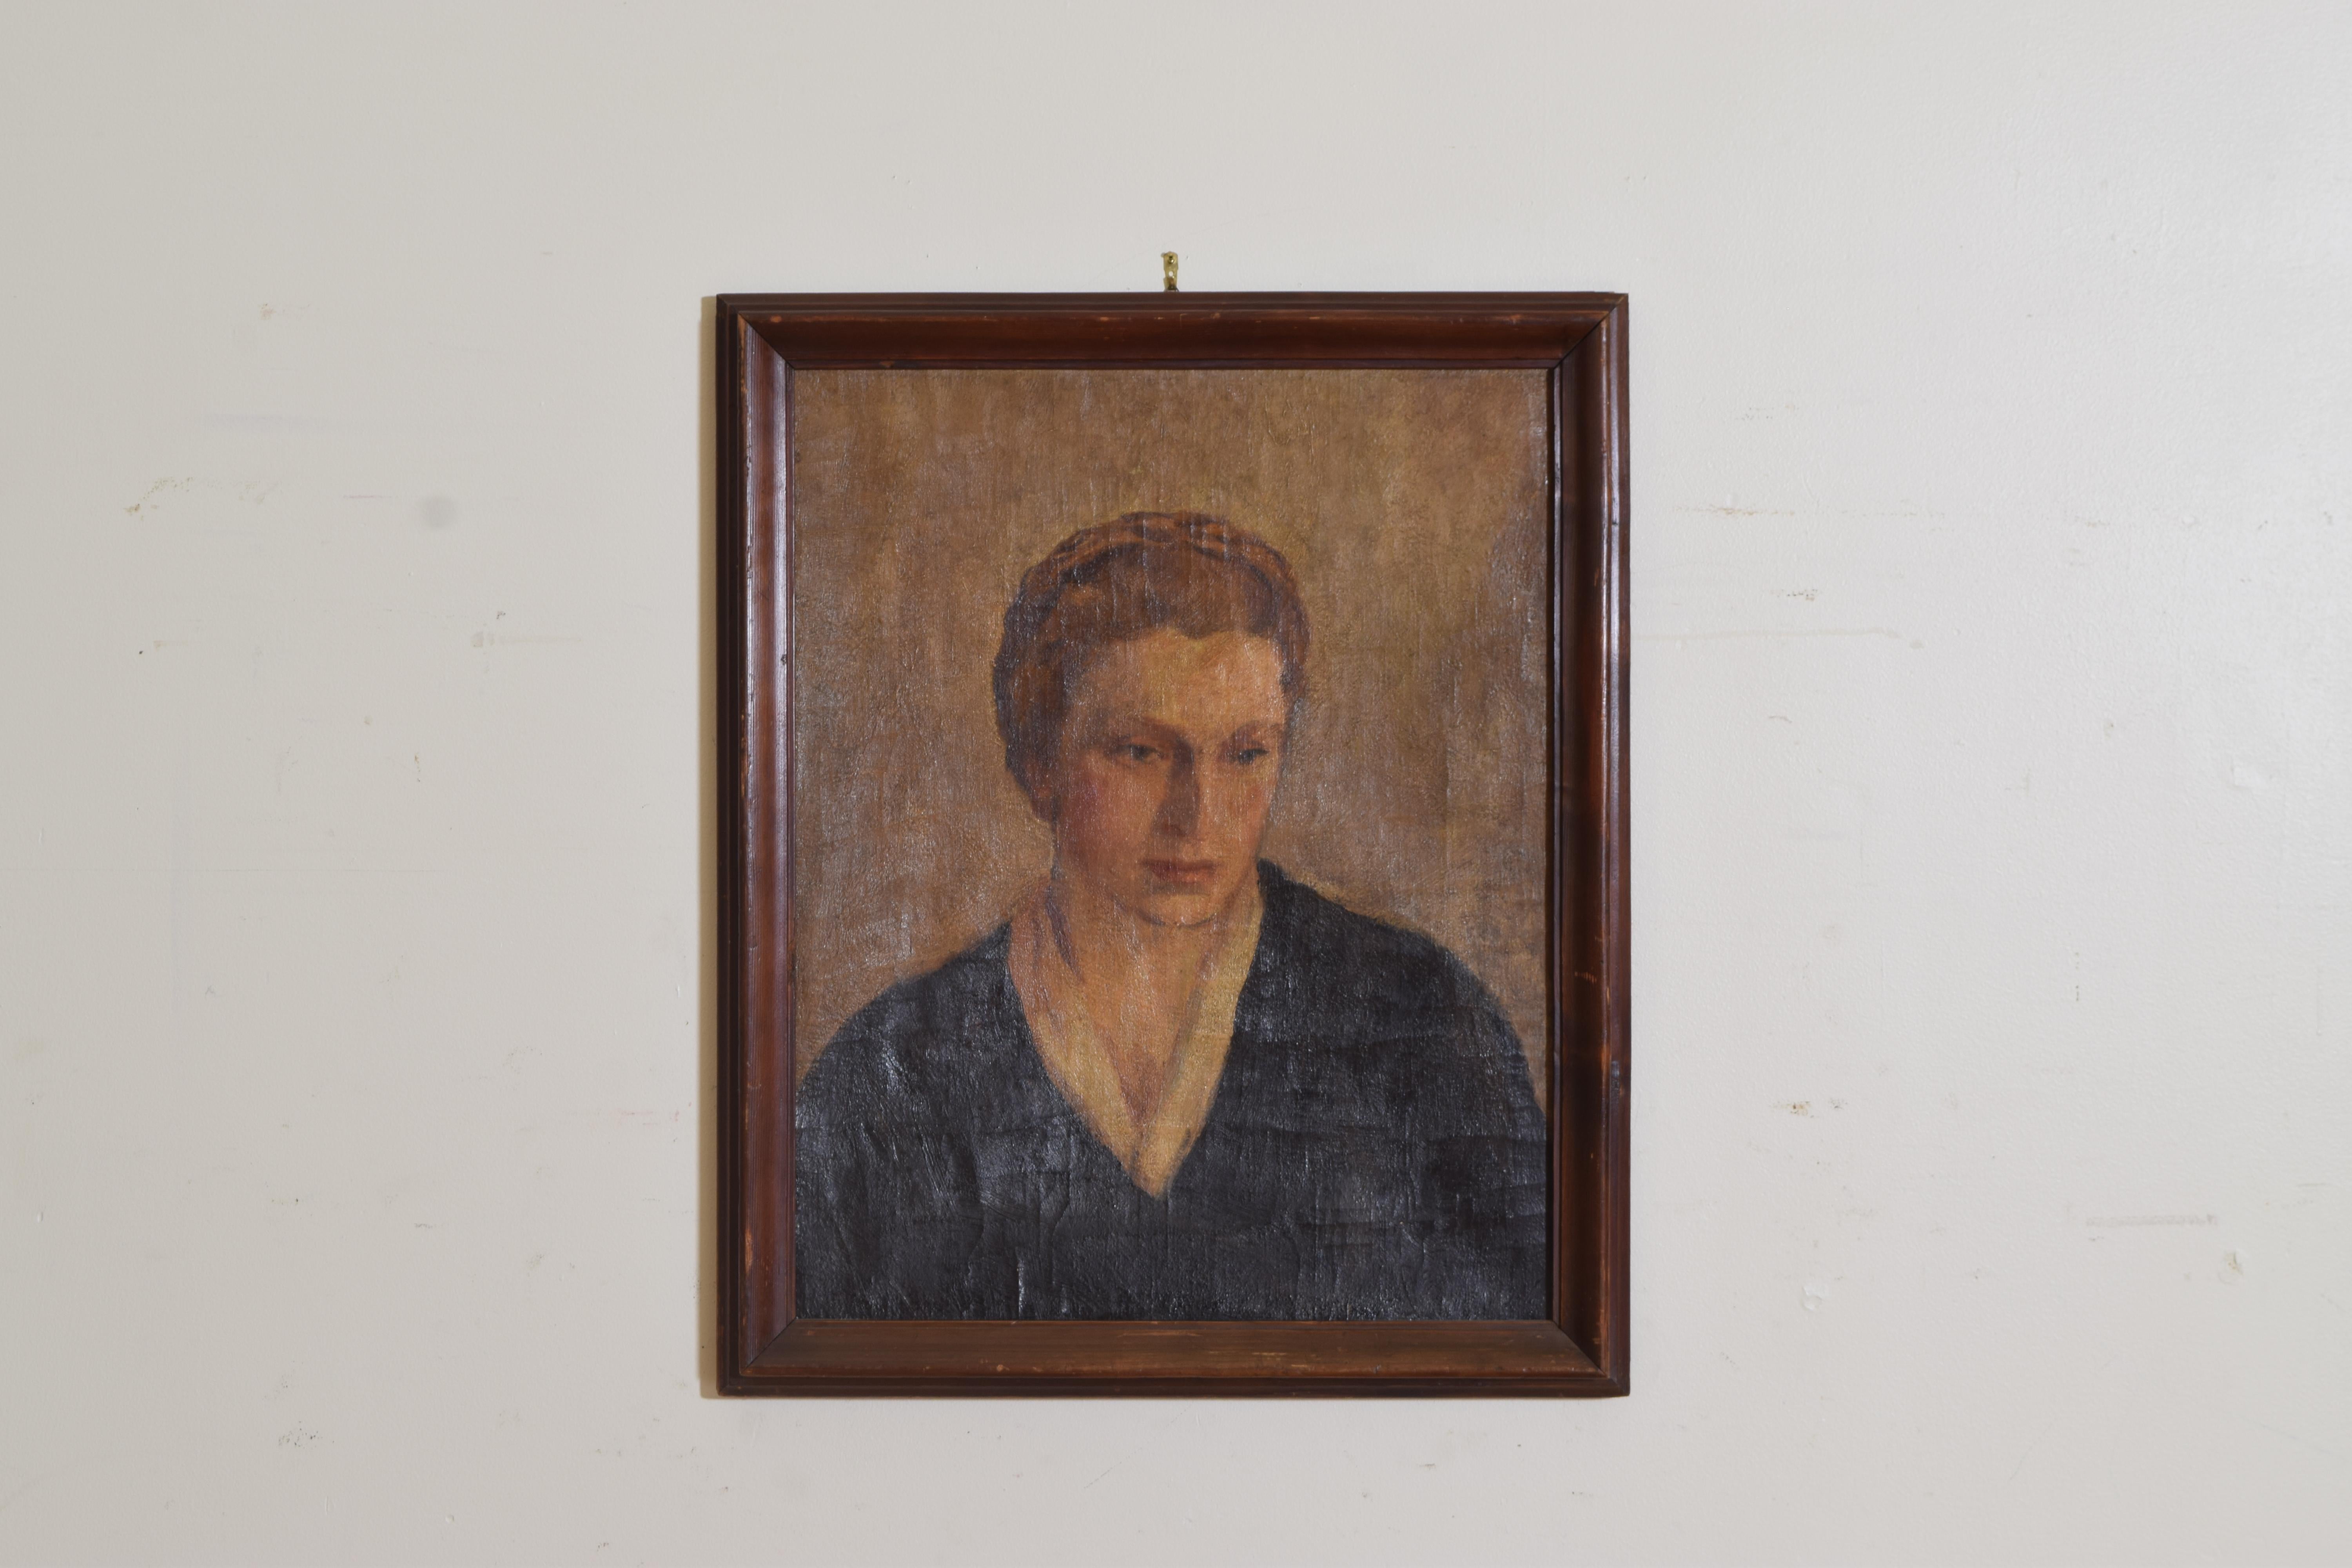 Painted in the style of the realist school, see Edward Hopper, this lady gazes somberly forward and downward to her left, retaining original wooden frame.